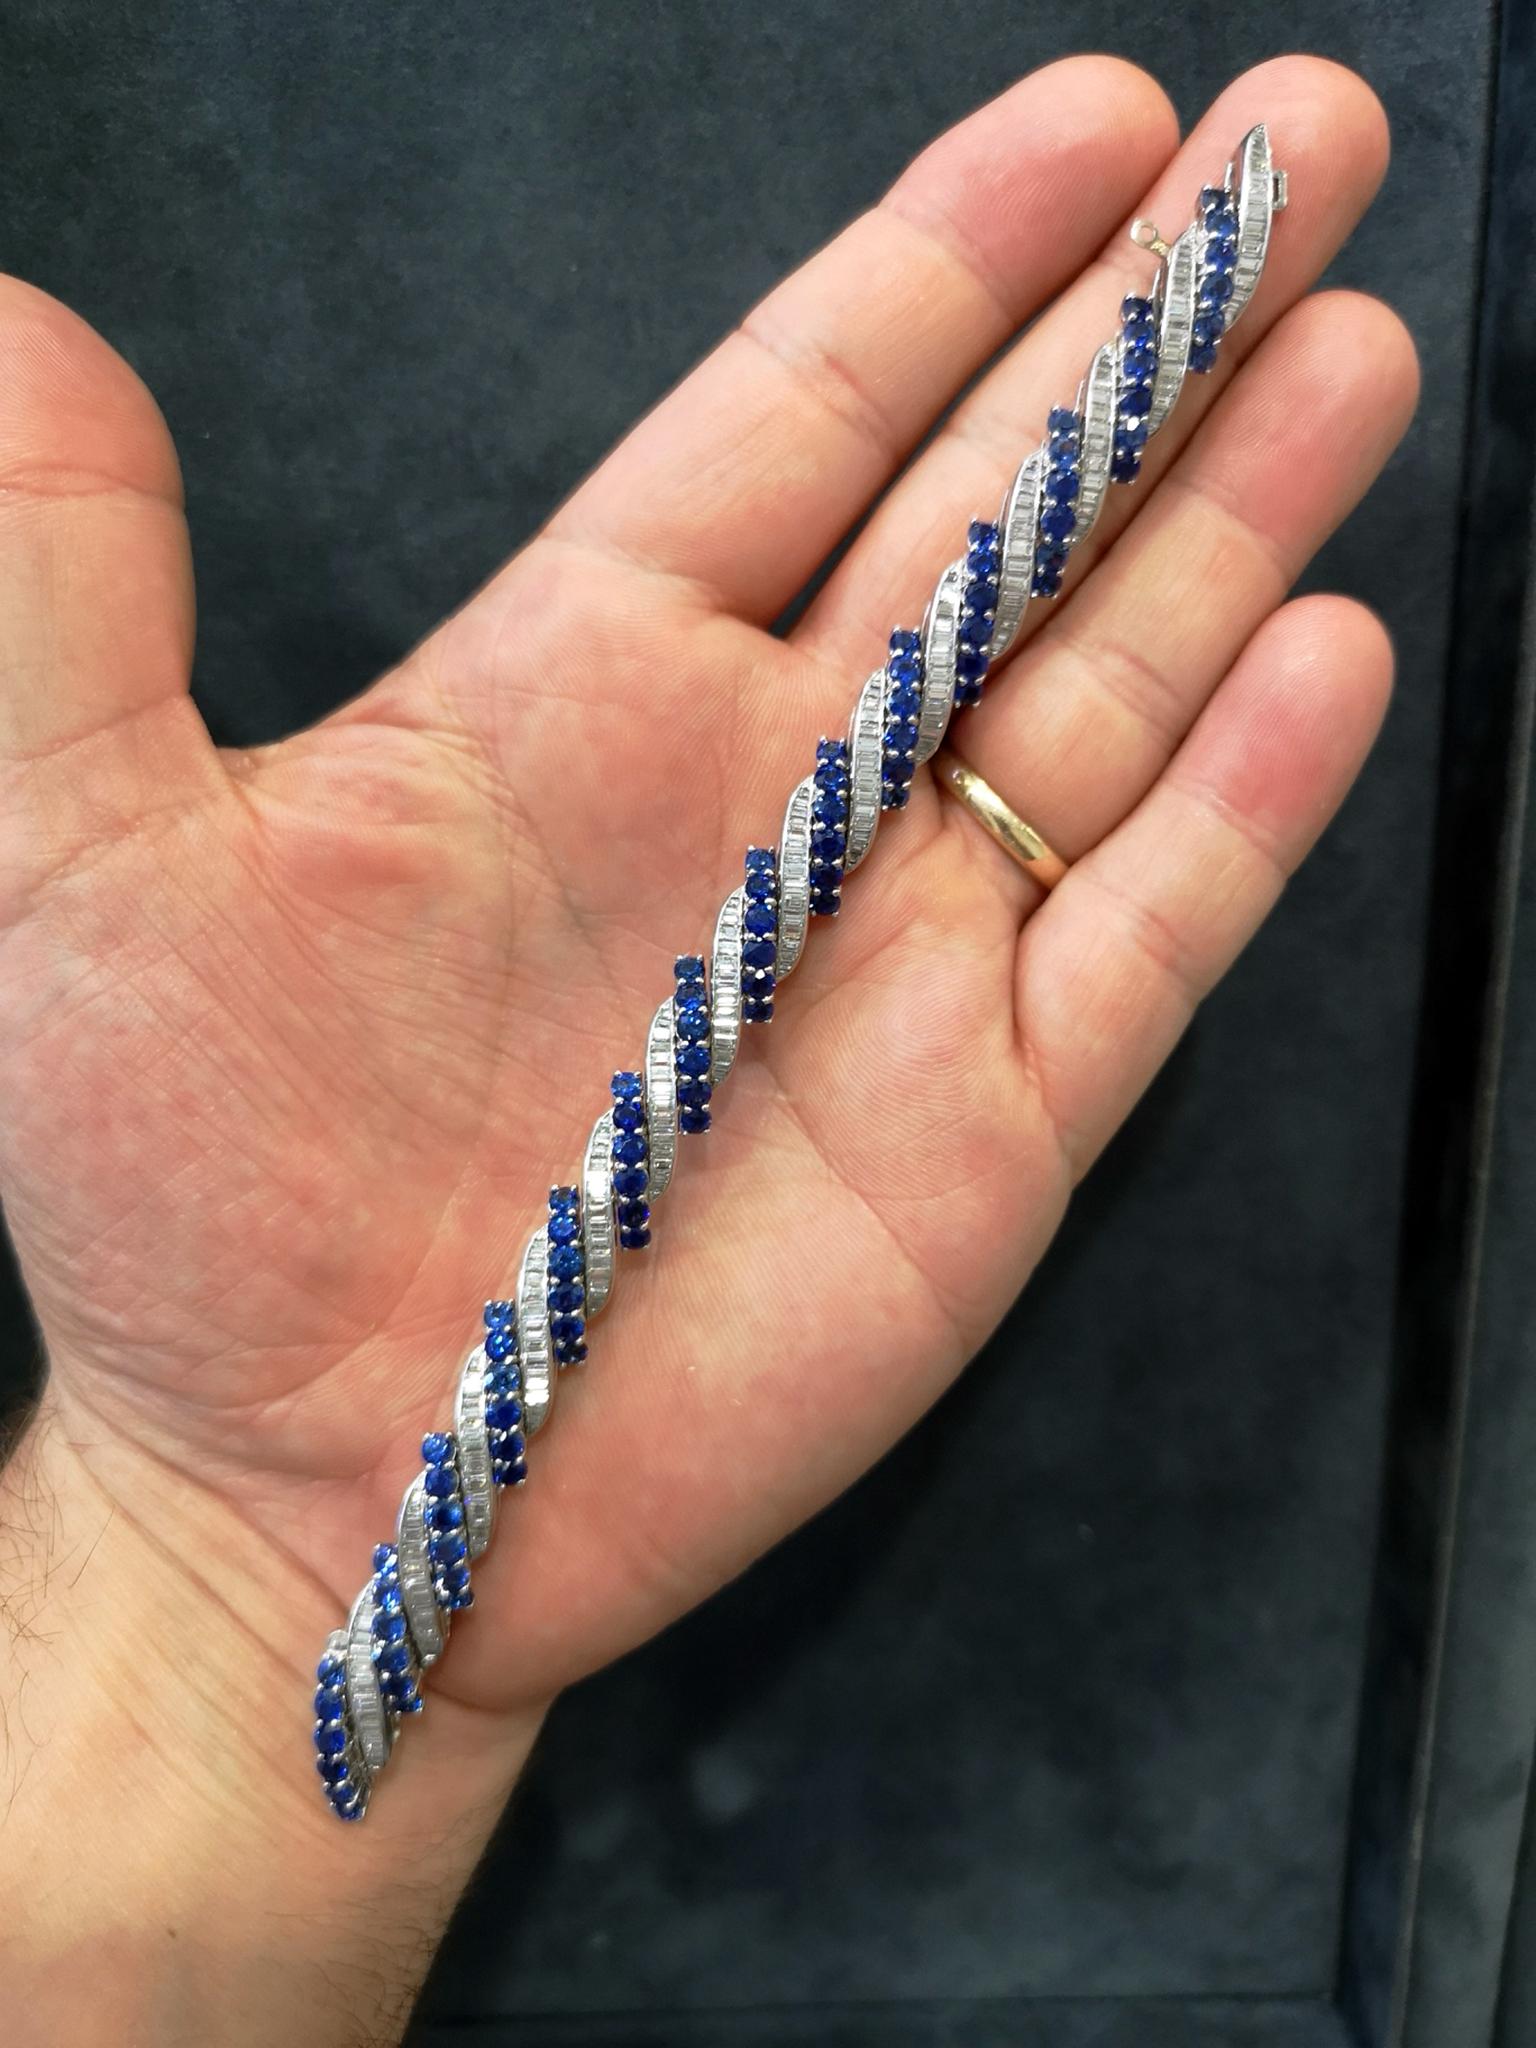 An exquisite, high quality platinum bracelet set with alternating diagonal rows of claw-set, brilliant-cut blue sapphires and channel-set, baguette-cut diamonds. Approximately 10.00 carats of sapphires in total. Approximately 7.00 carats of diamond